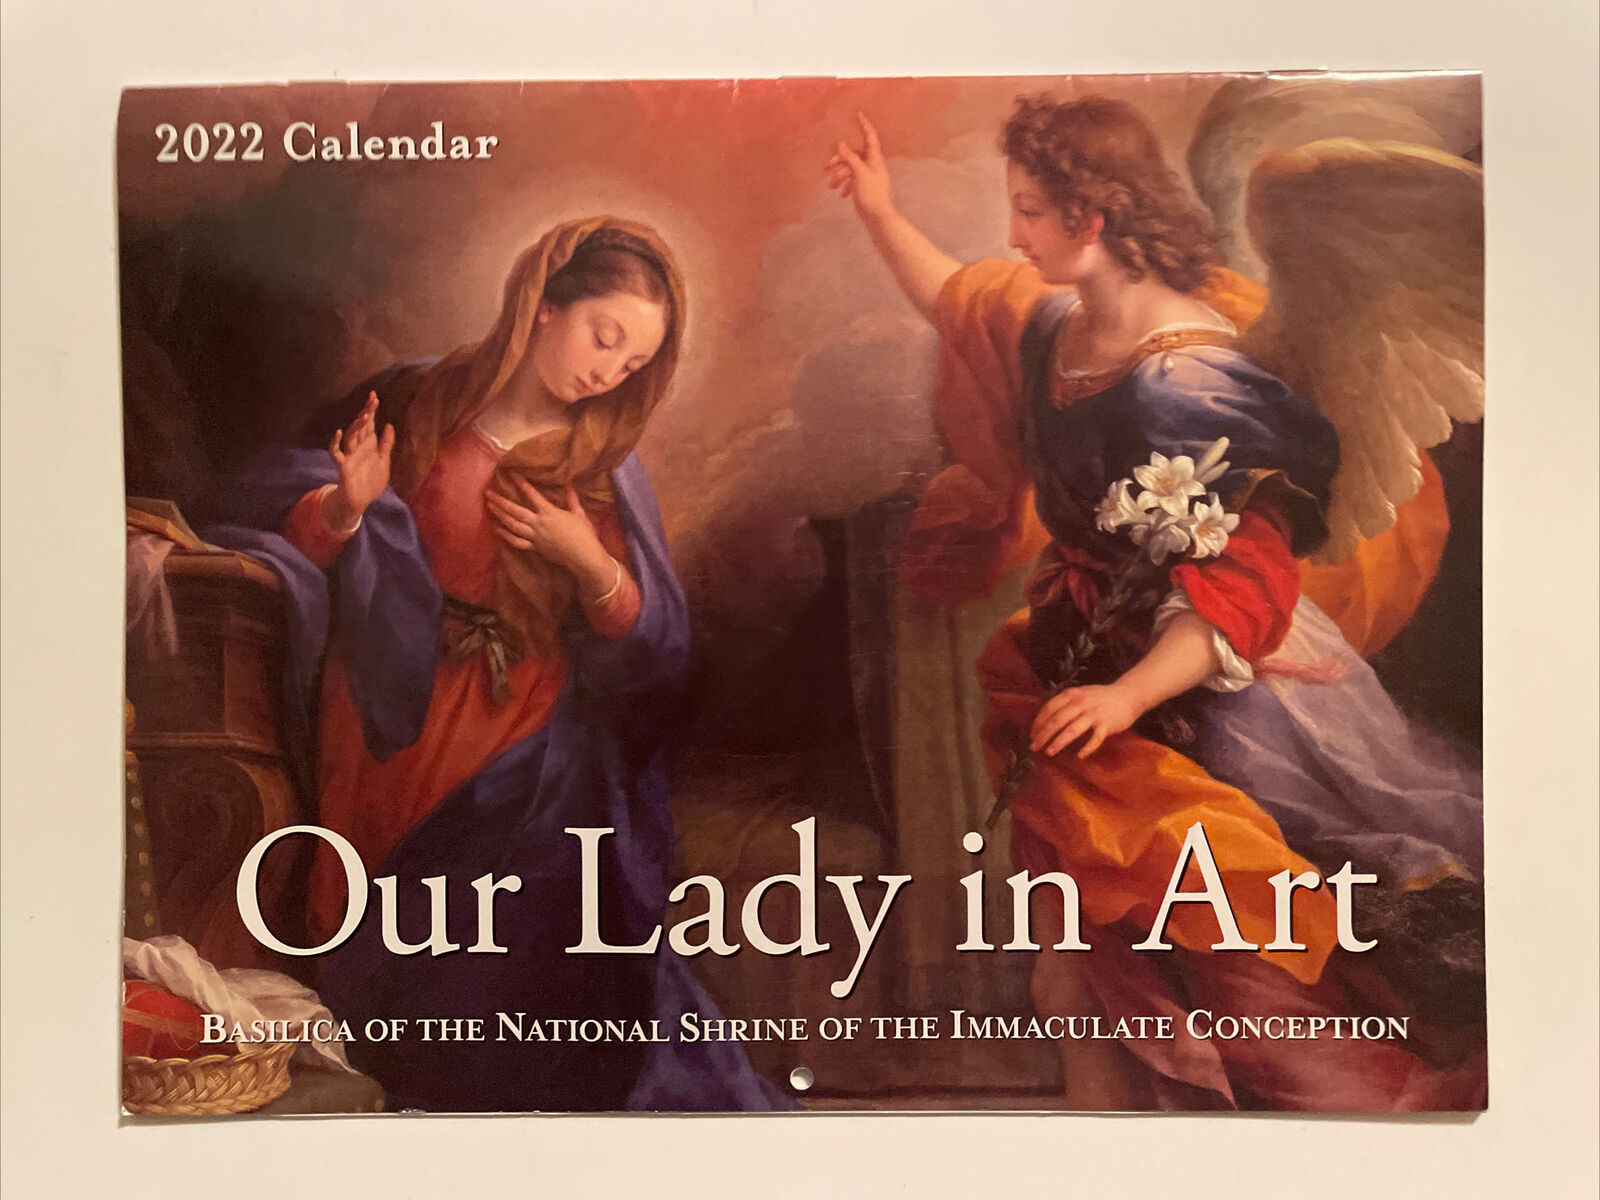 Our Lady in Art  2022 Calendar  NEW Basilica of shrine of immaculate conception